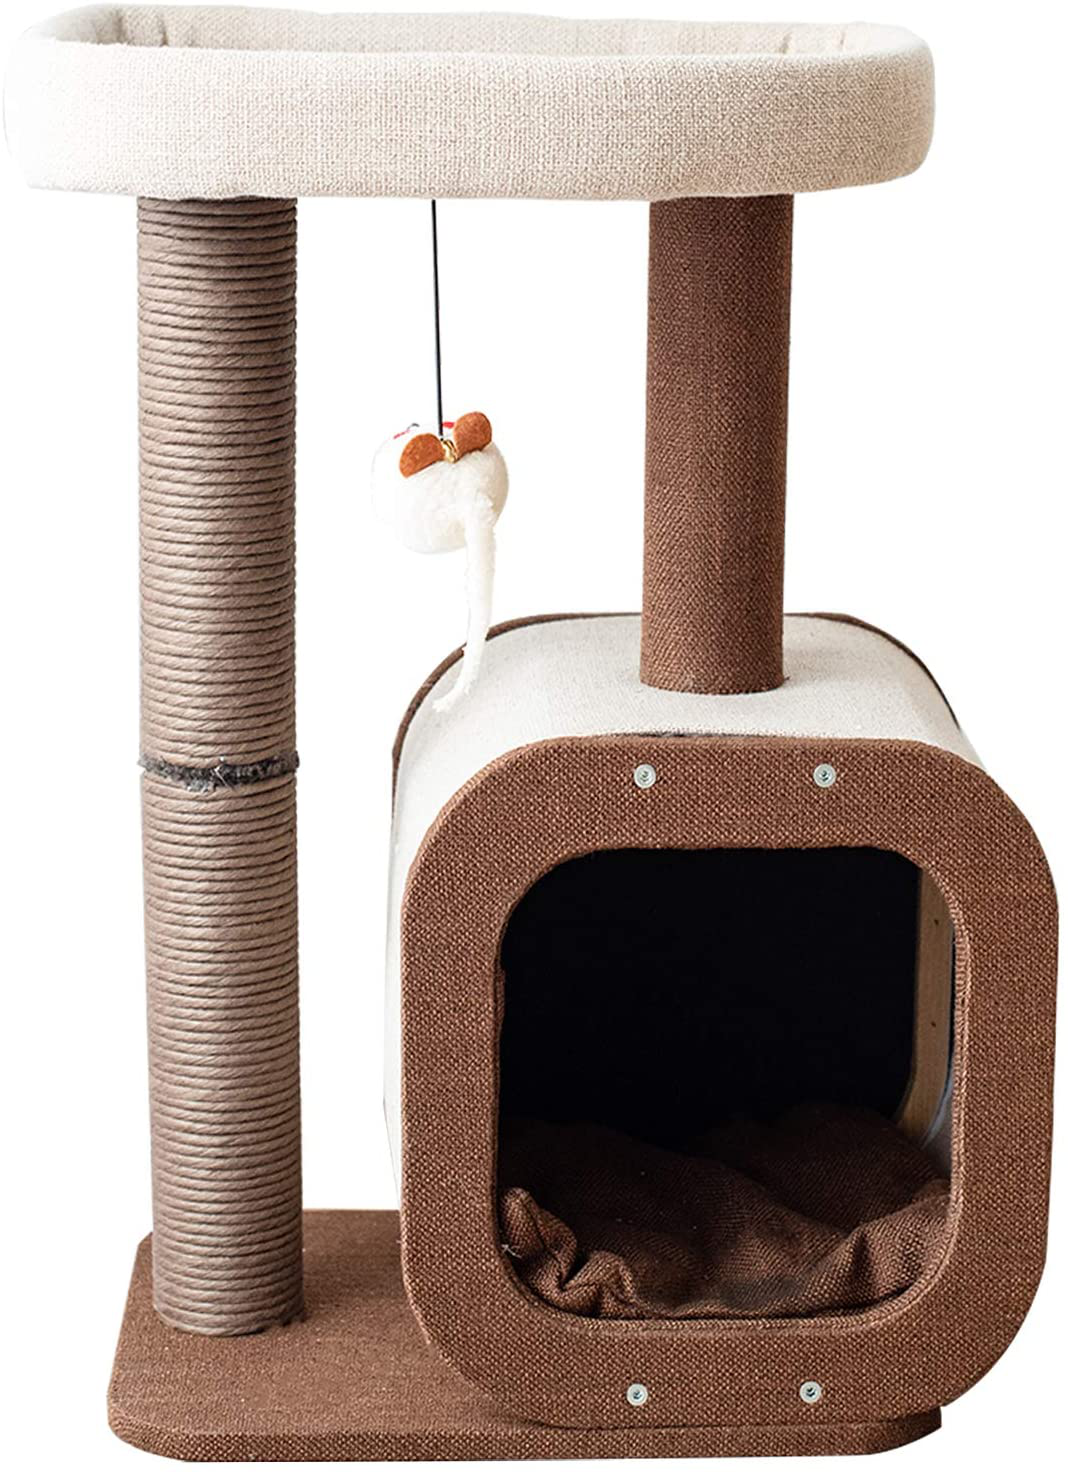 Catry Kitten Cat Tree Condo with Paper Rope Covered Scratching Post Activity Center for Climbing Relaxing and Playing Natural Jute Fiber Pet Stand